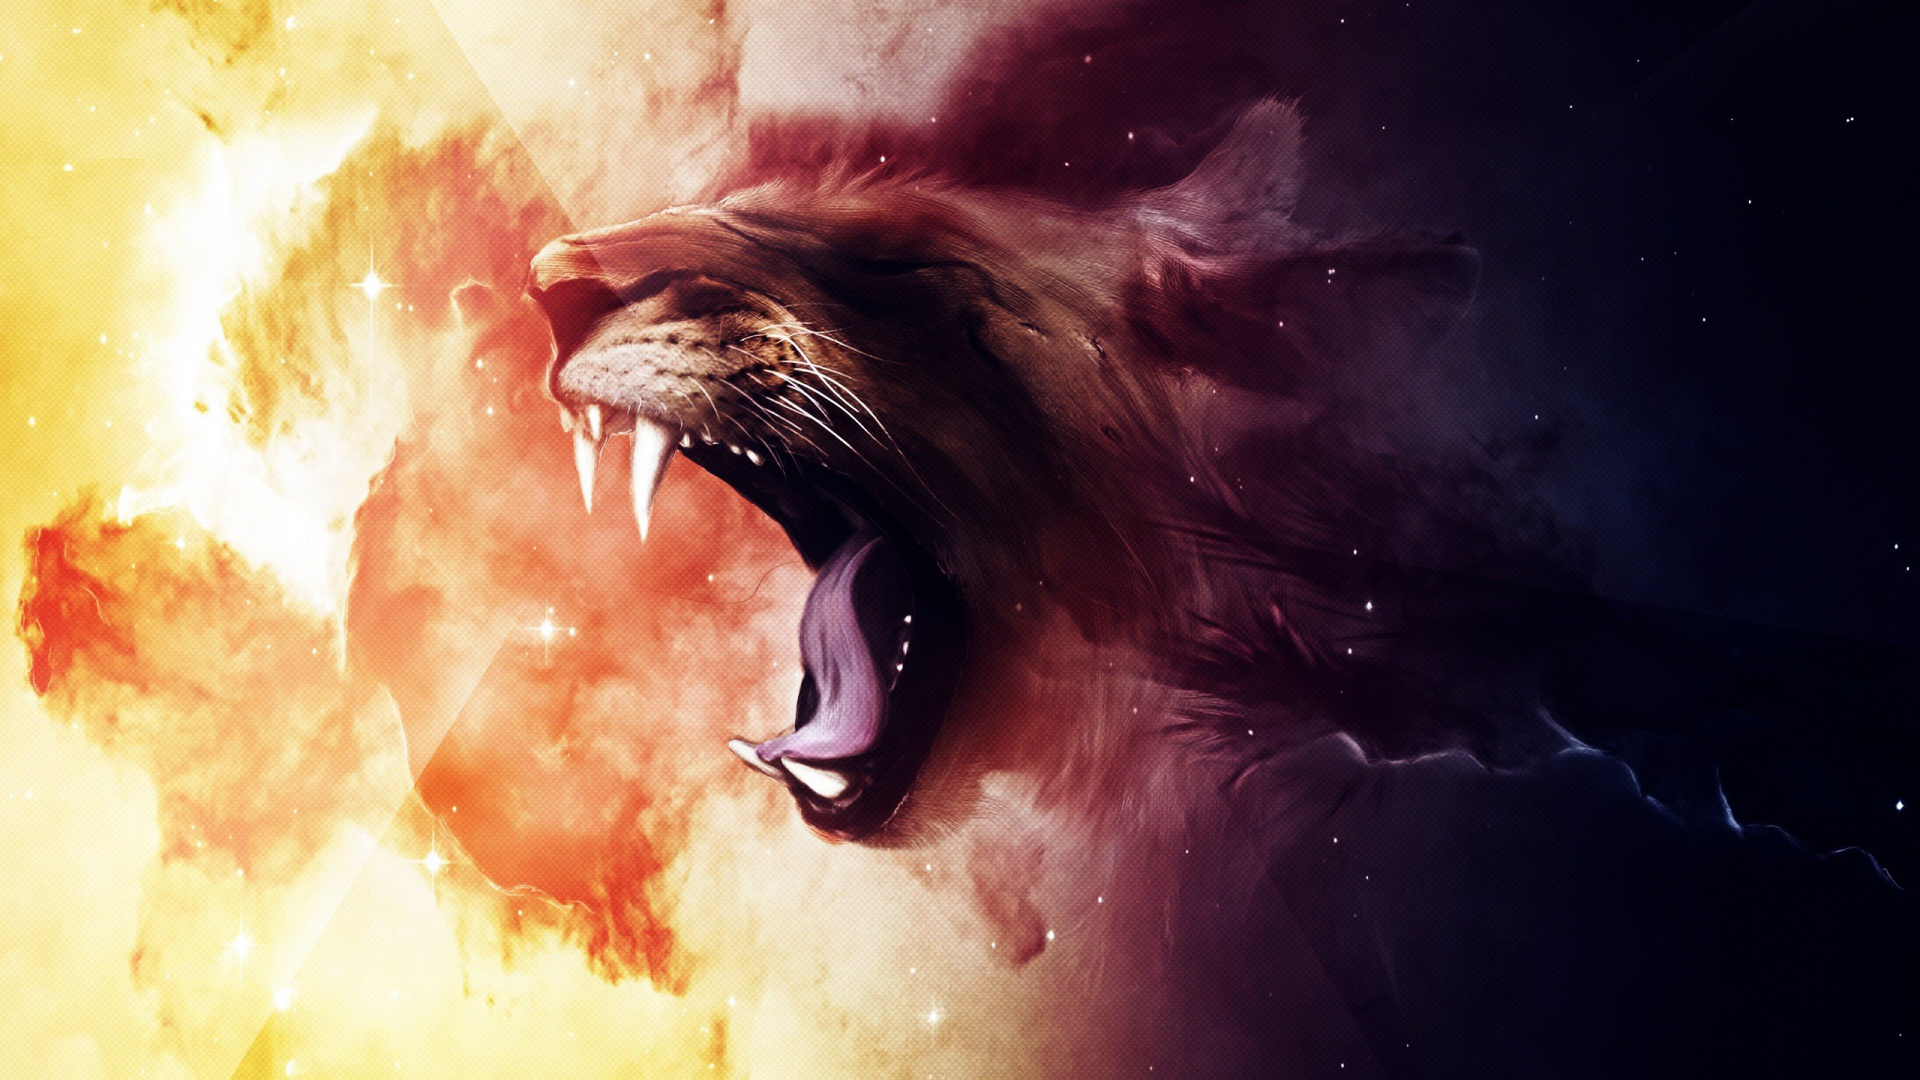 Brown and White Lion Illustration. Wallpaper in 1920x1080 Resolution